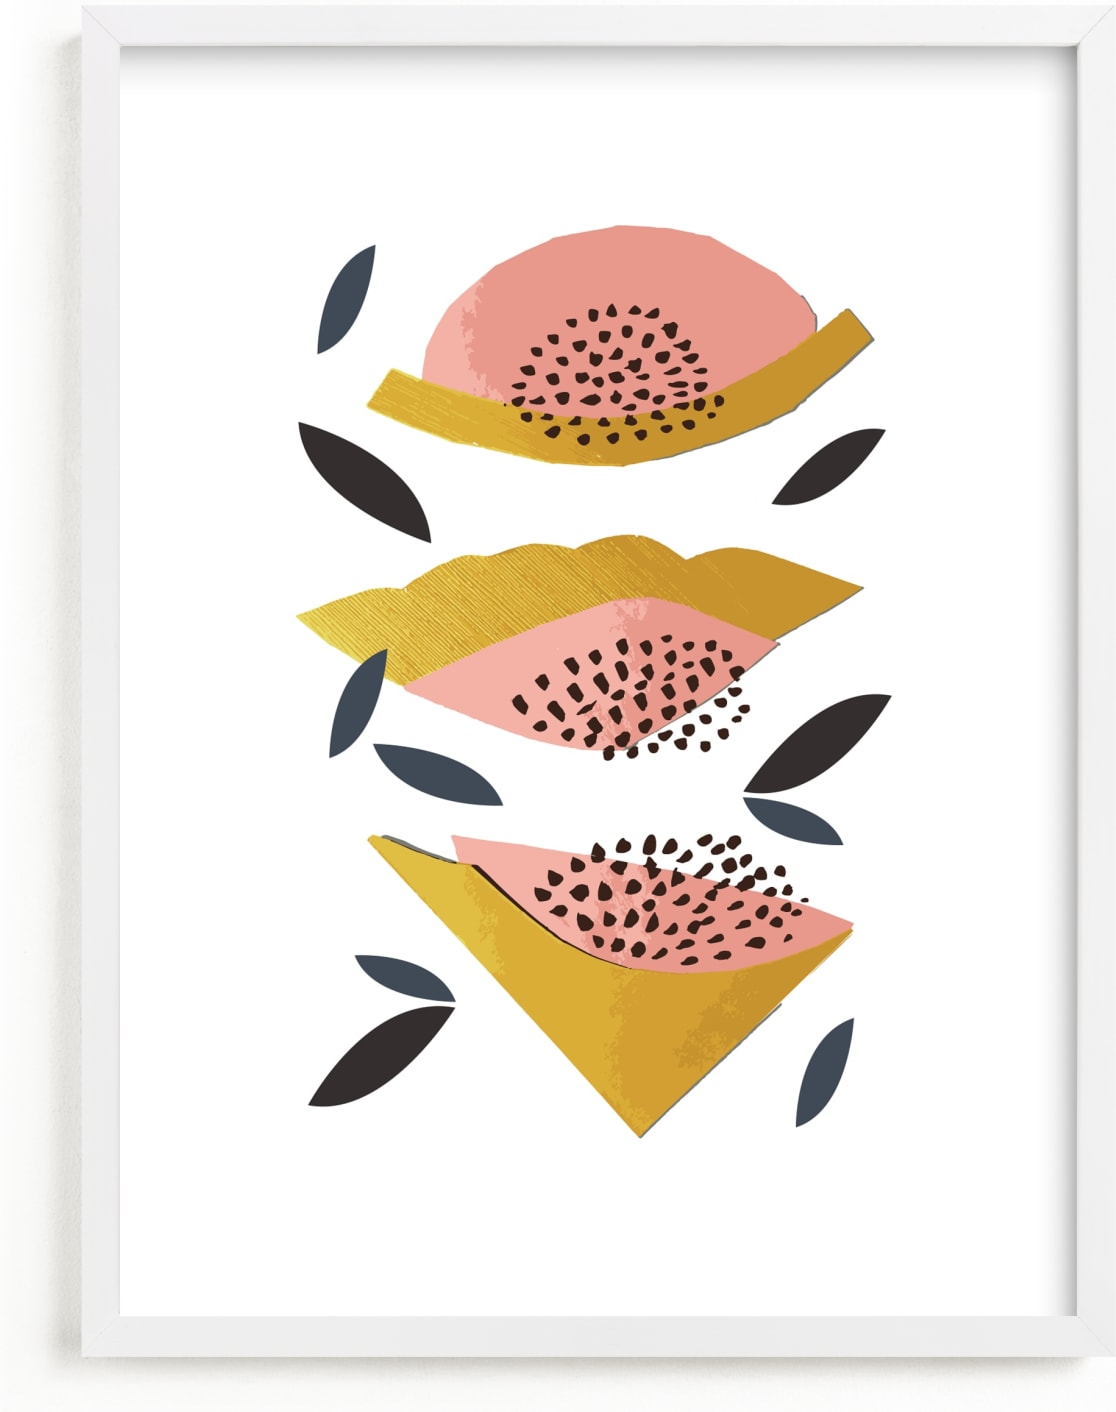 This is a colorful kids wall art by Jenna Skead called Honey Melon.